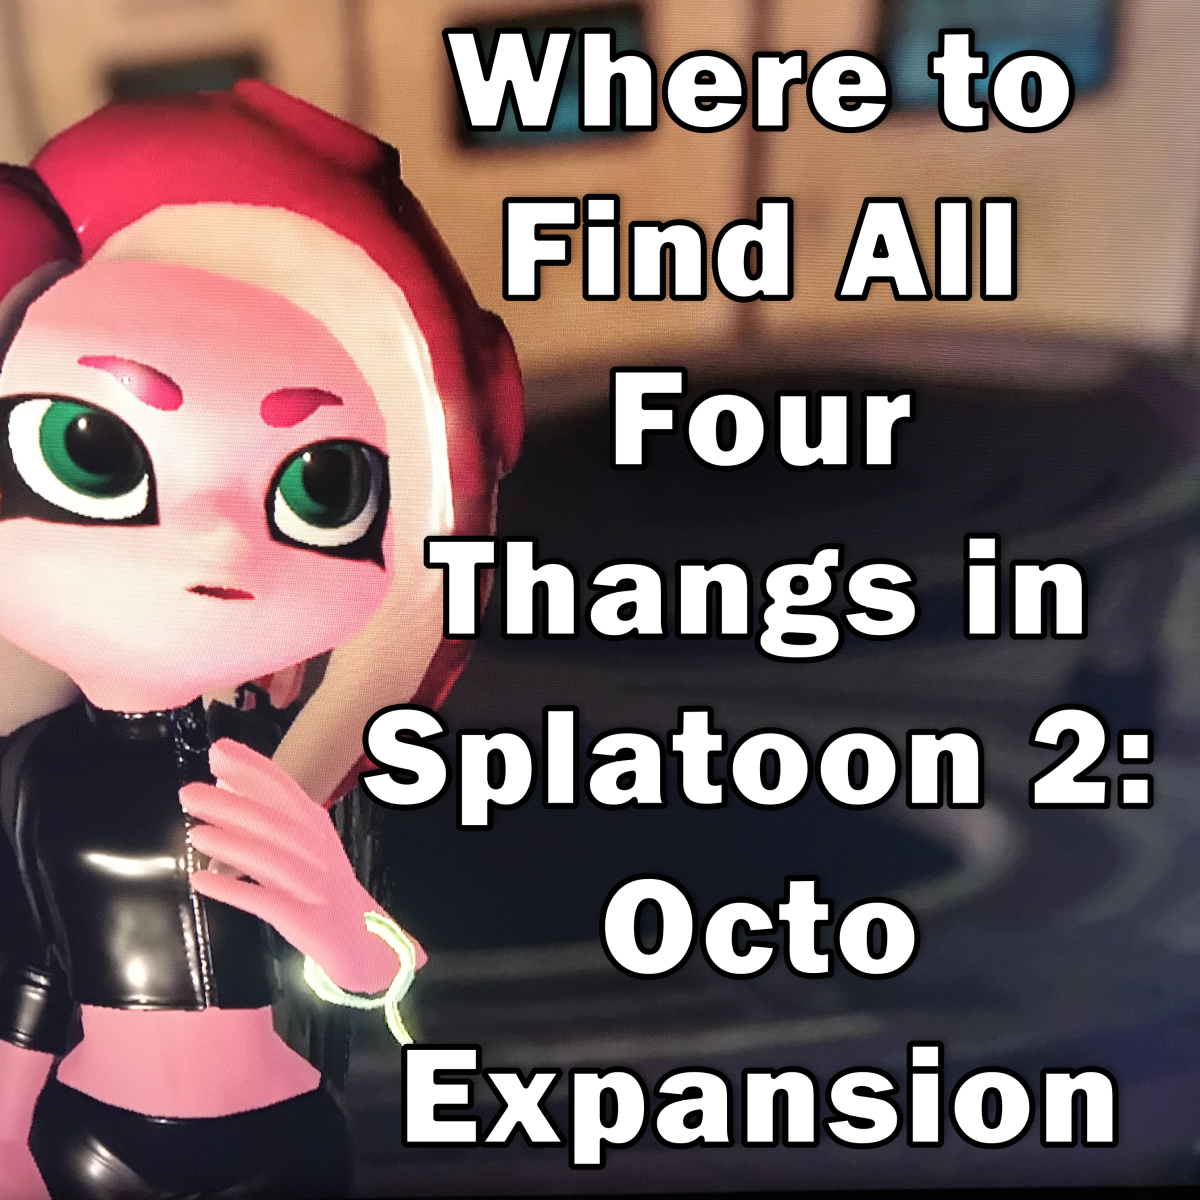 Where to Find All 4 Thangs in 